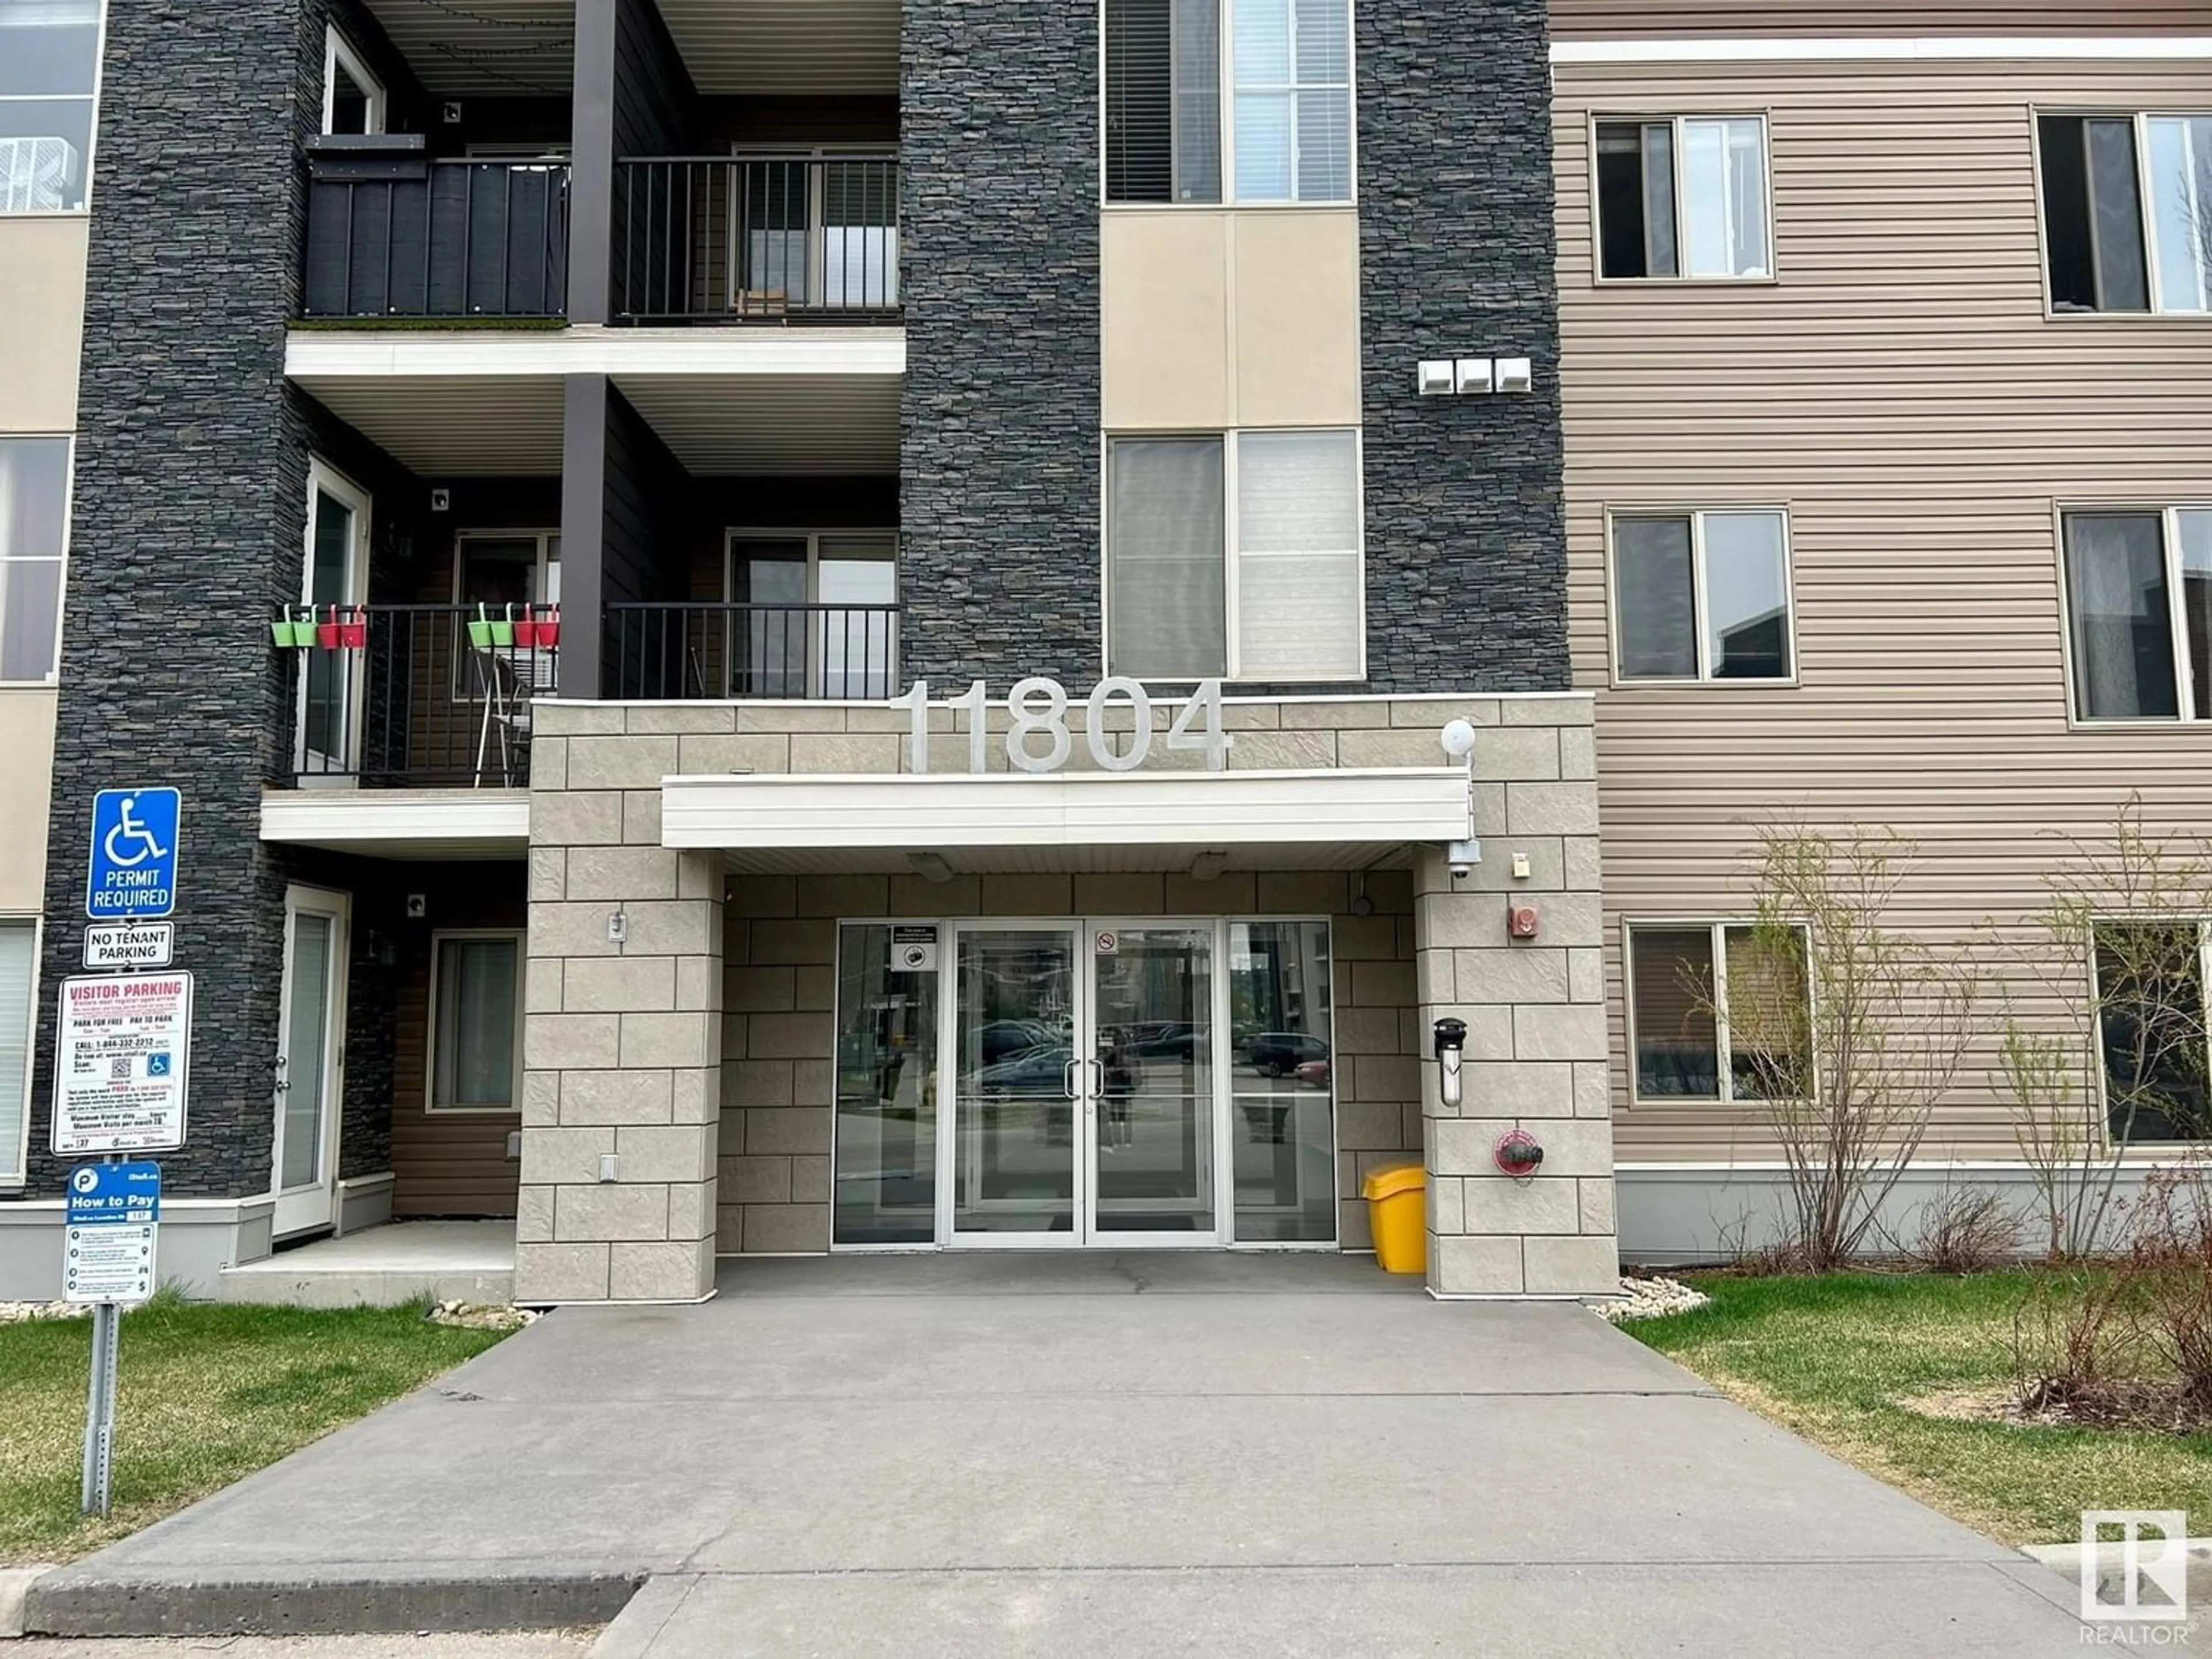 A pic from exterior of the house or condo for #108 11804 22 AV SW SW, Edmonton Alberta T6E2A2